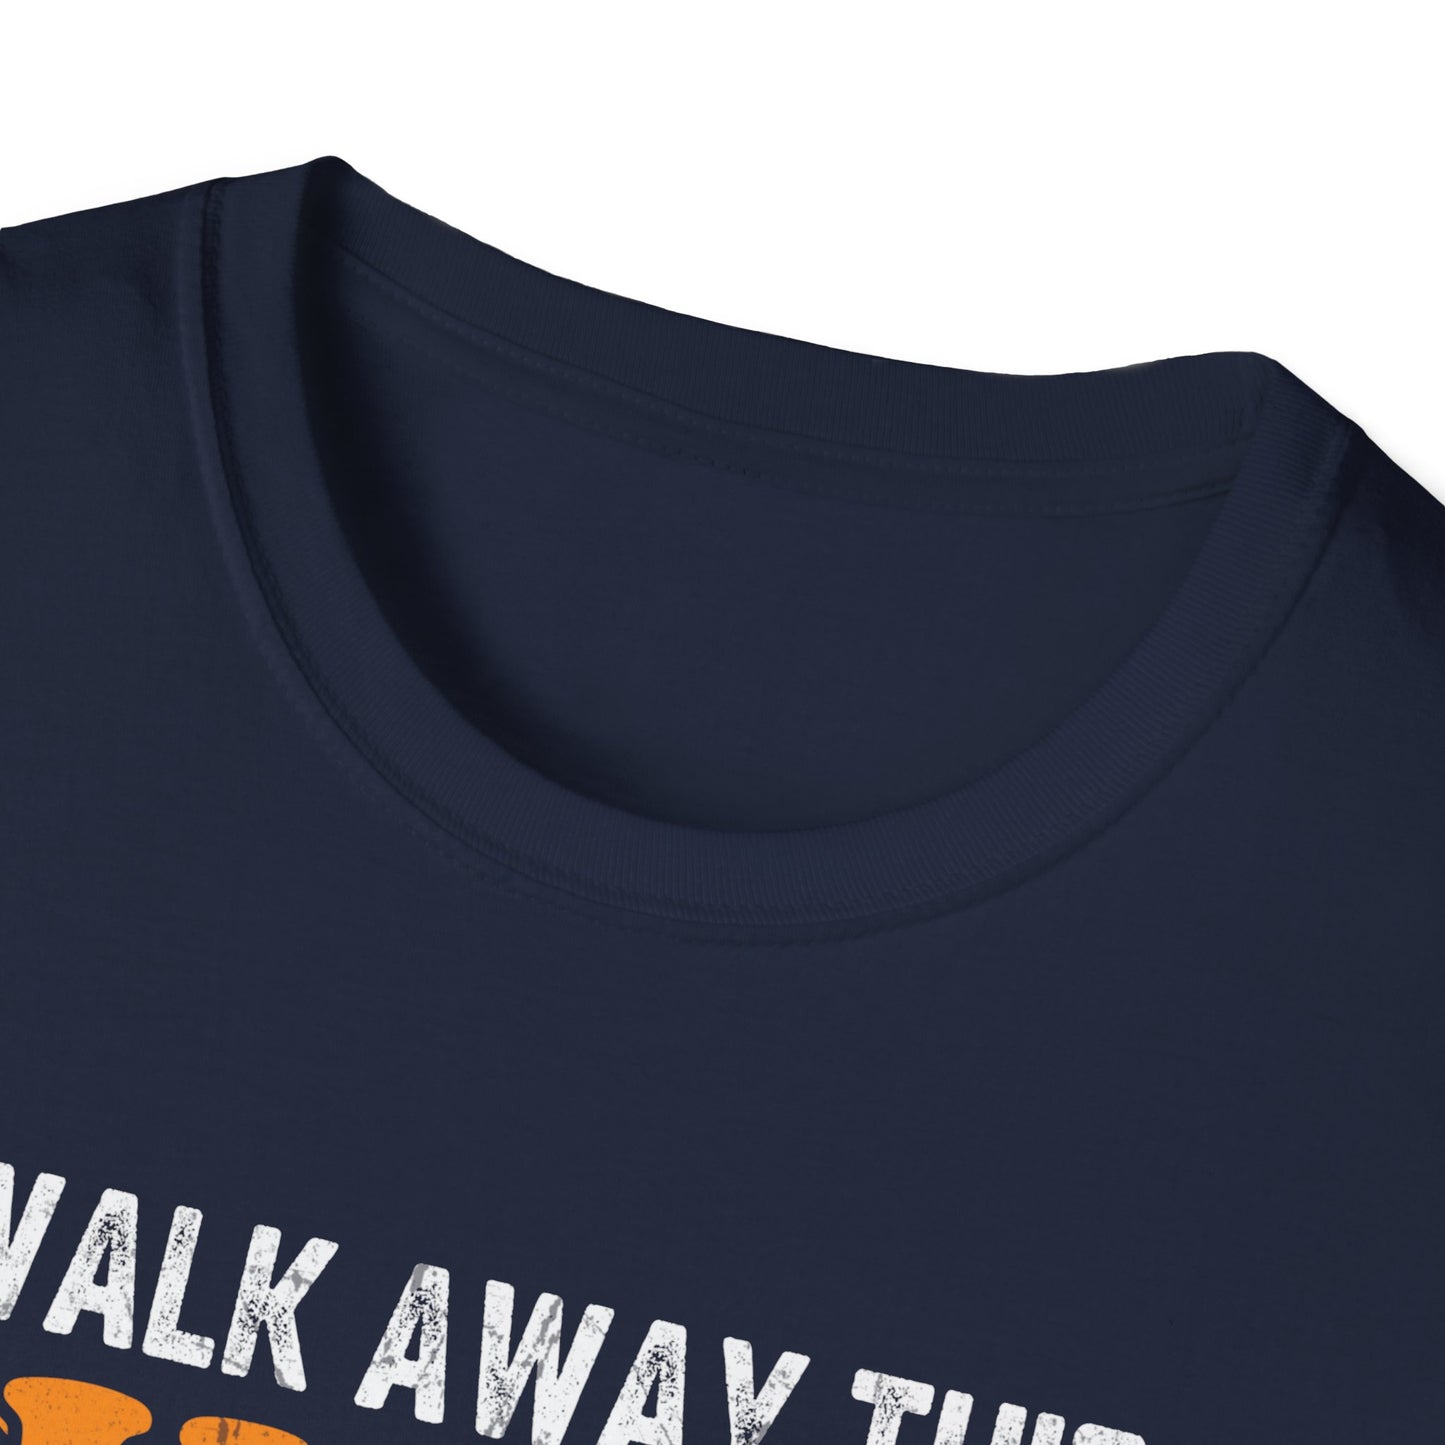 Walk Away This Viking Has Anger Issues And A serious Dislike For Stupid People T-Shirt